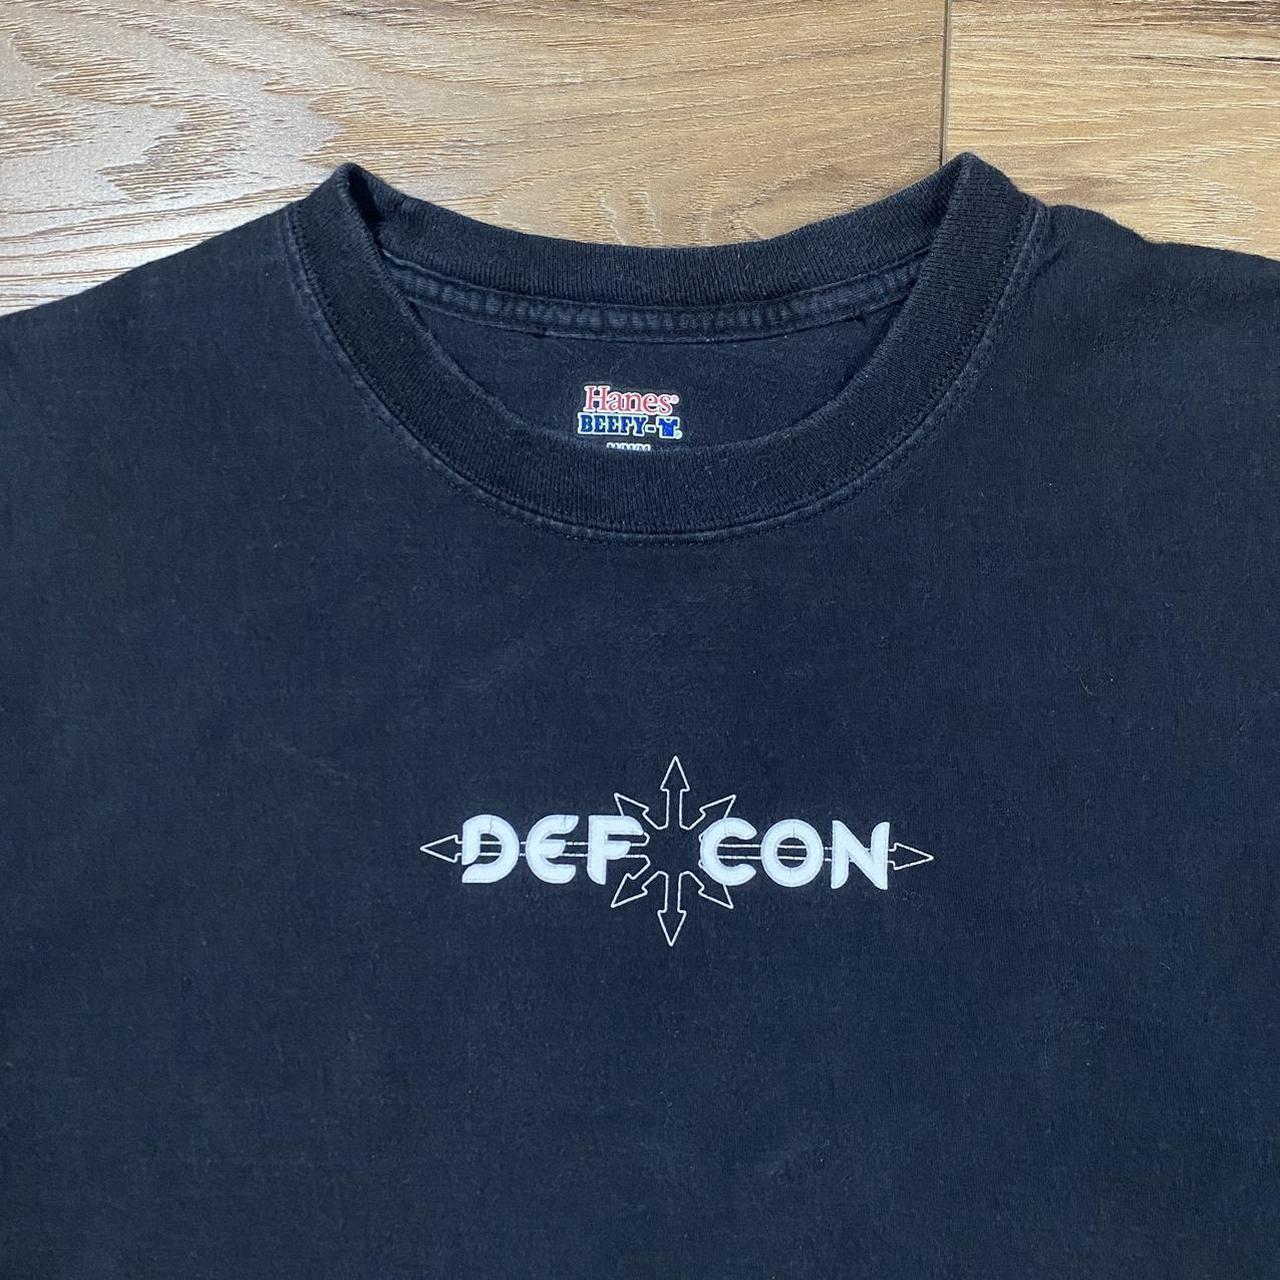 Def Con 23 graphic shirt -see pictures for - Depop